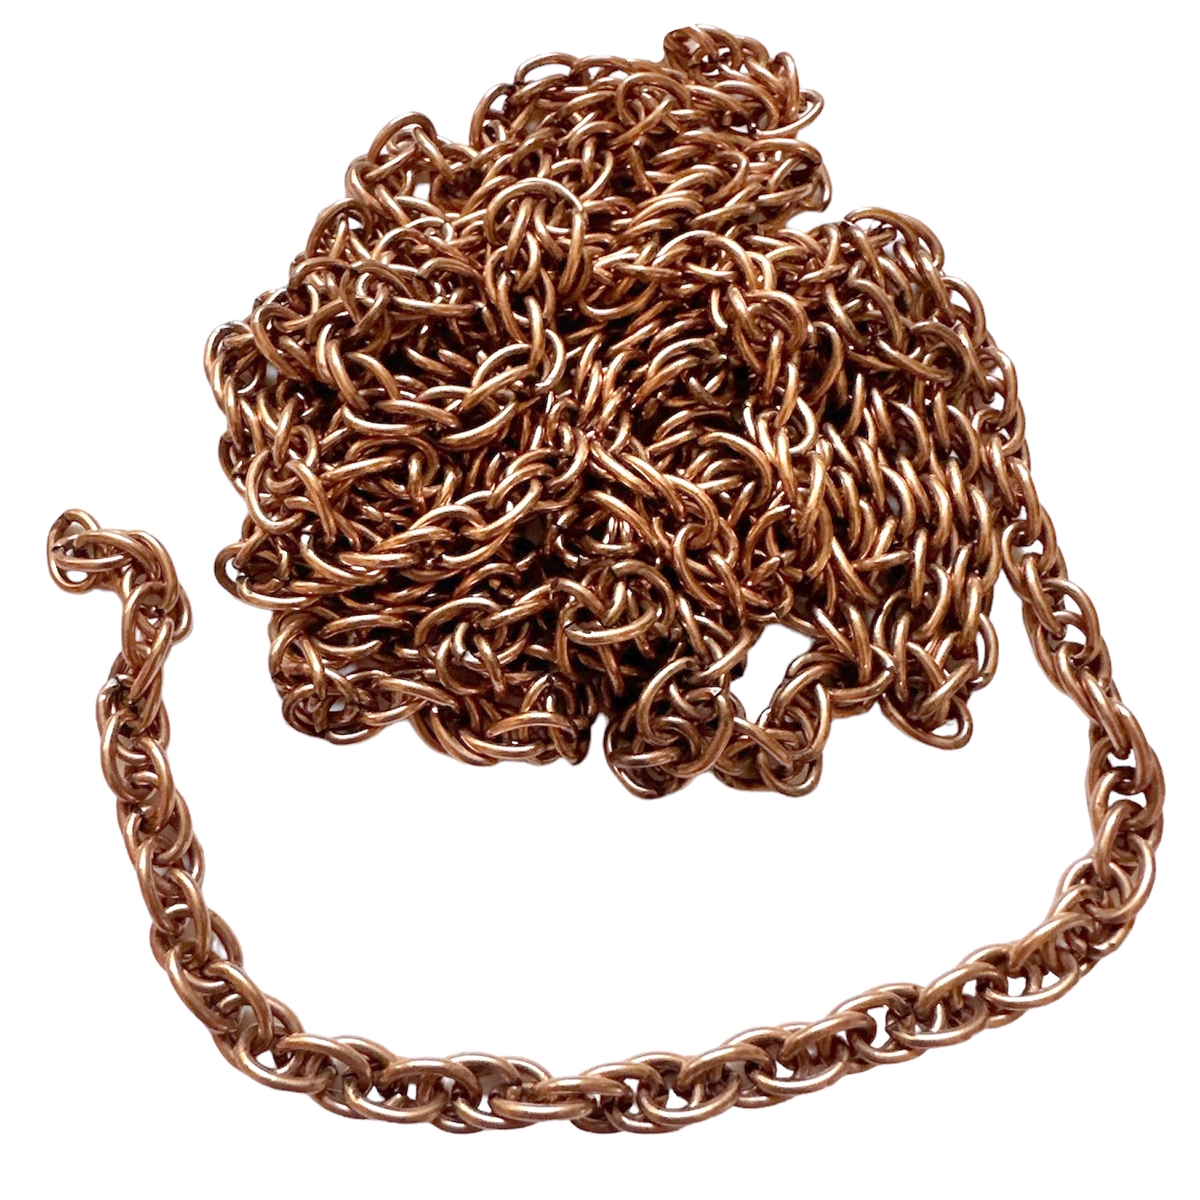 Rope Chain, Antique Copper, 8x5mm link, 08802, copper chain, rope chain ...